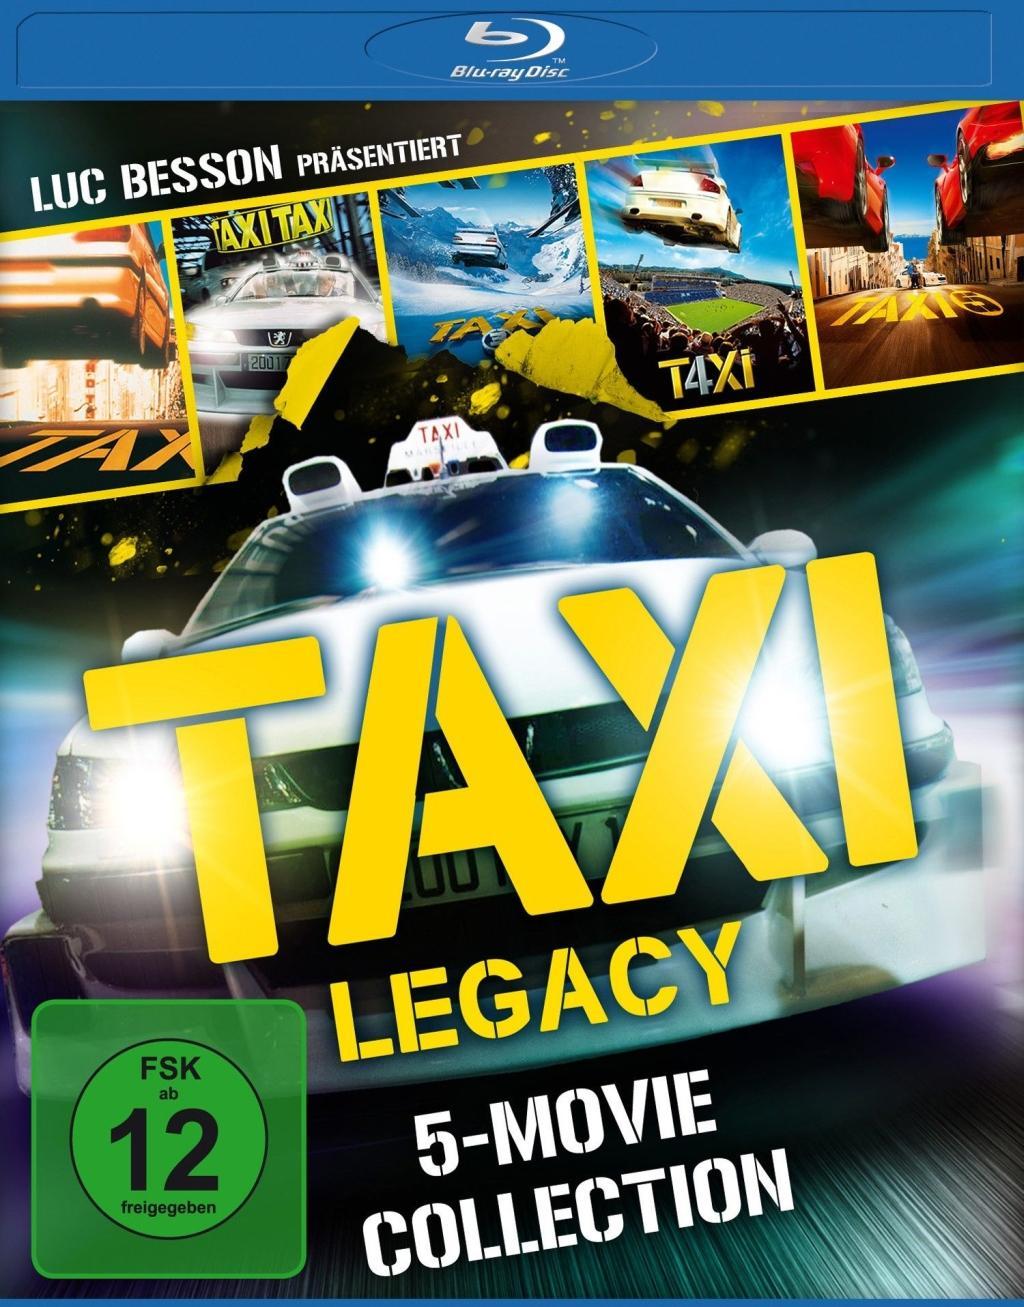 Videoclip Taxi Legacy - 5-Movie Collection, 5 Blu-ray 